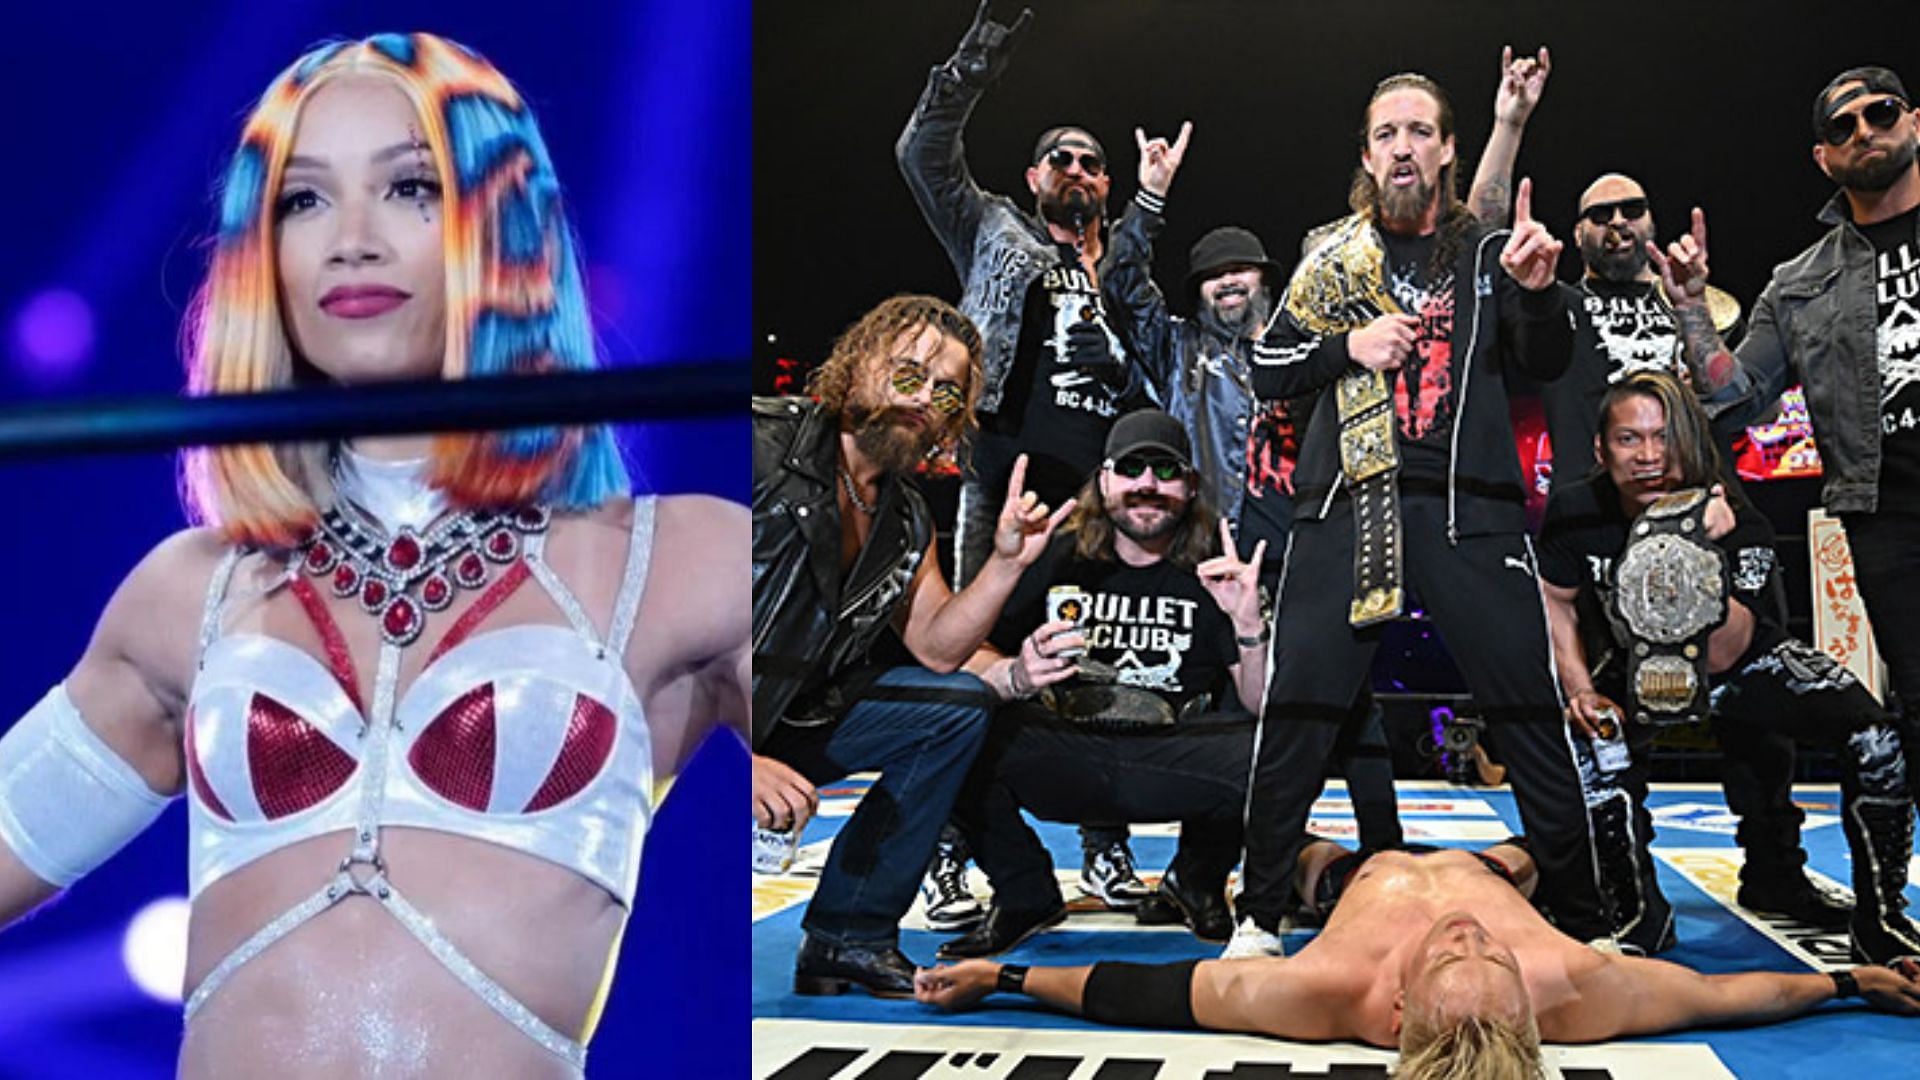 Bullet Club leader Jay White weighs in on Sasha Banks possibly joining the group